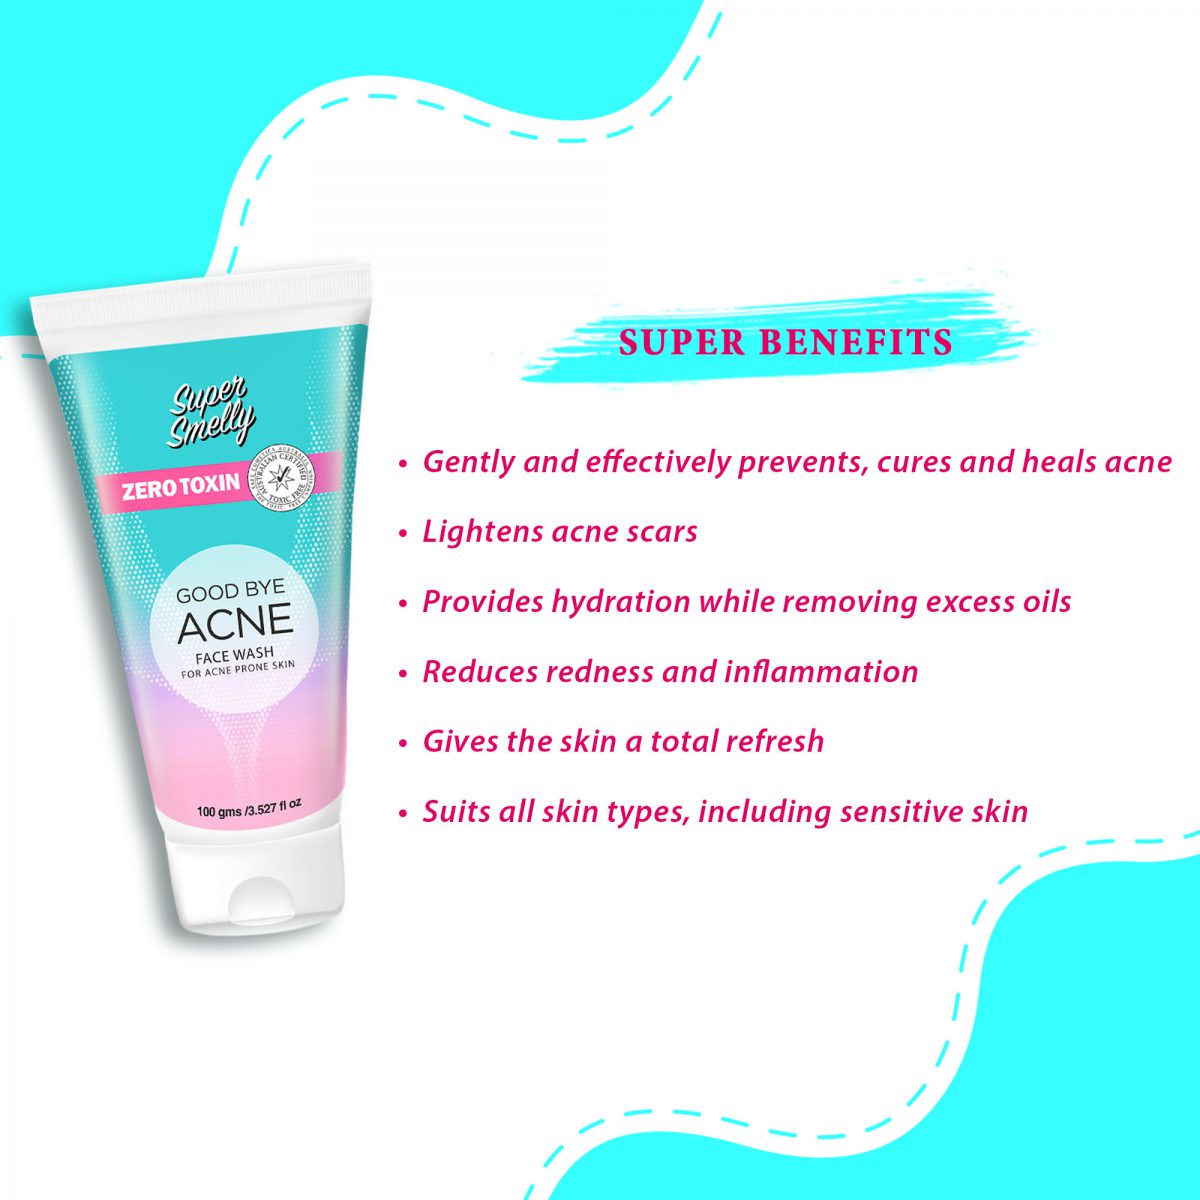 Goodbye Acne Face Wash (Pack of 2) | anti acne face wash, best acne scar removal products, best face wash for acne, best face wash for acne and pimples, best face wash for acne prone skin, best face wash for pimples and dark spots for women's in india, best face wash for pimples and dark spots in india,